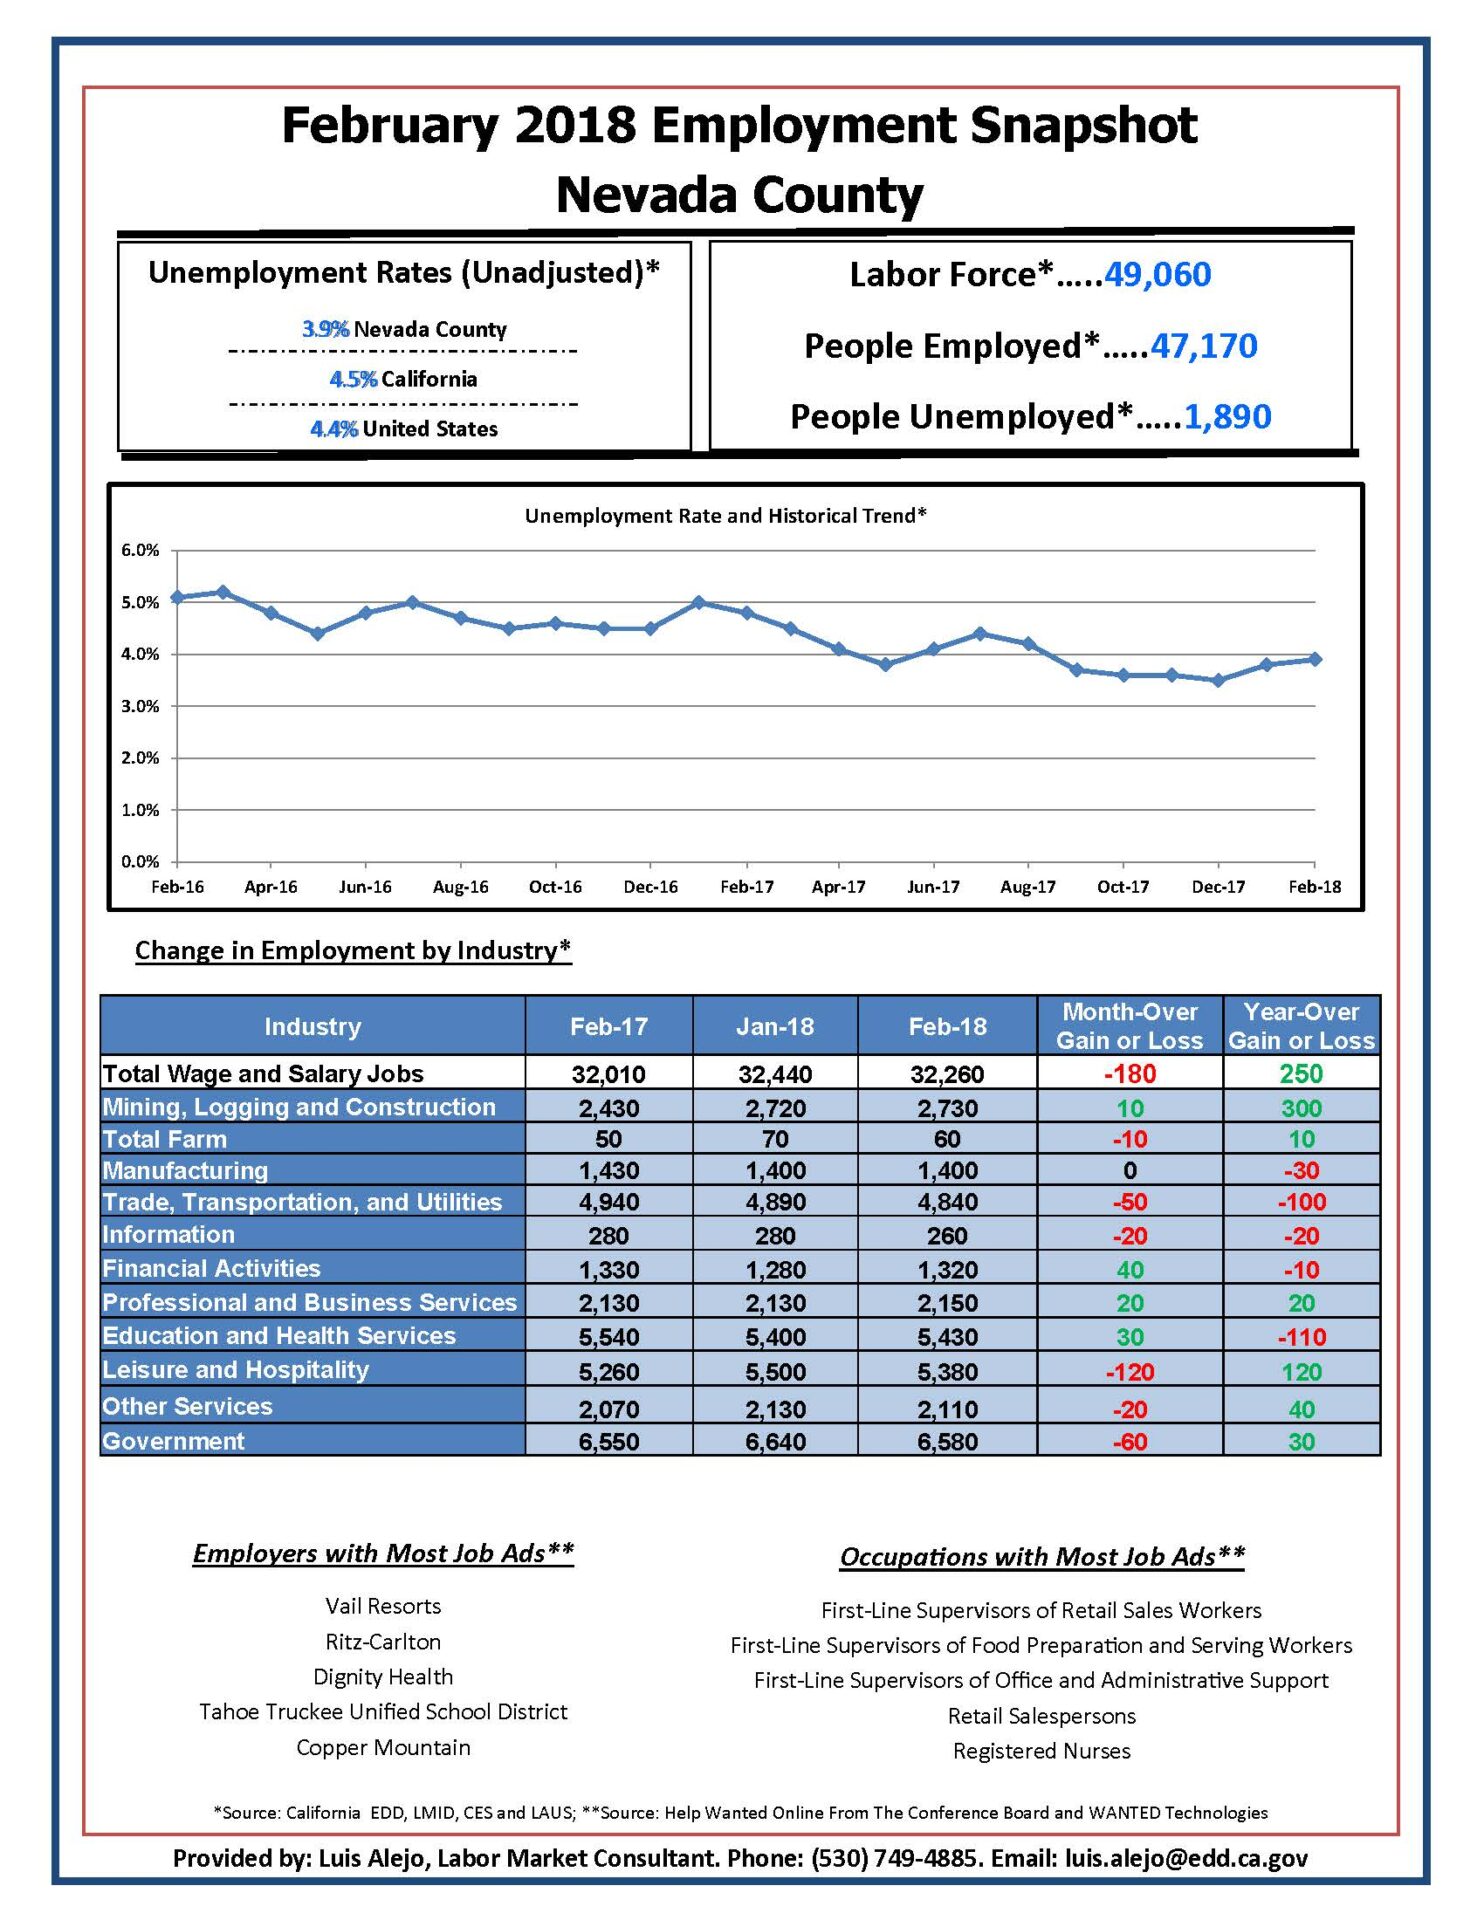 Nevada County Employment Snapshot for February 2018 Numbers 1